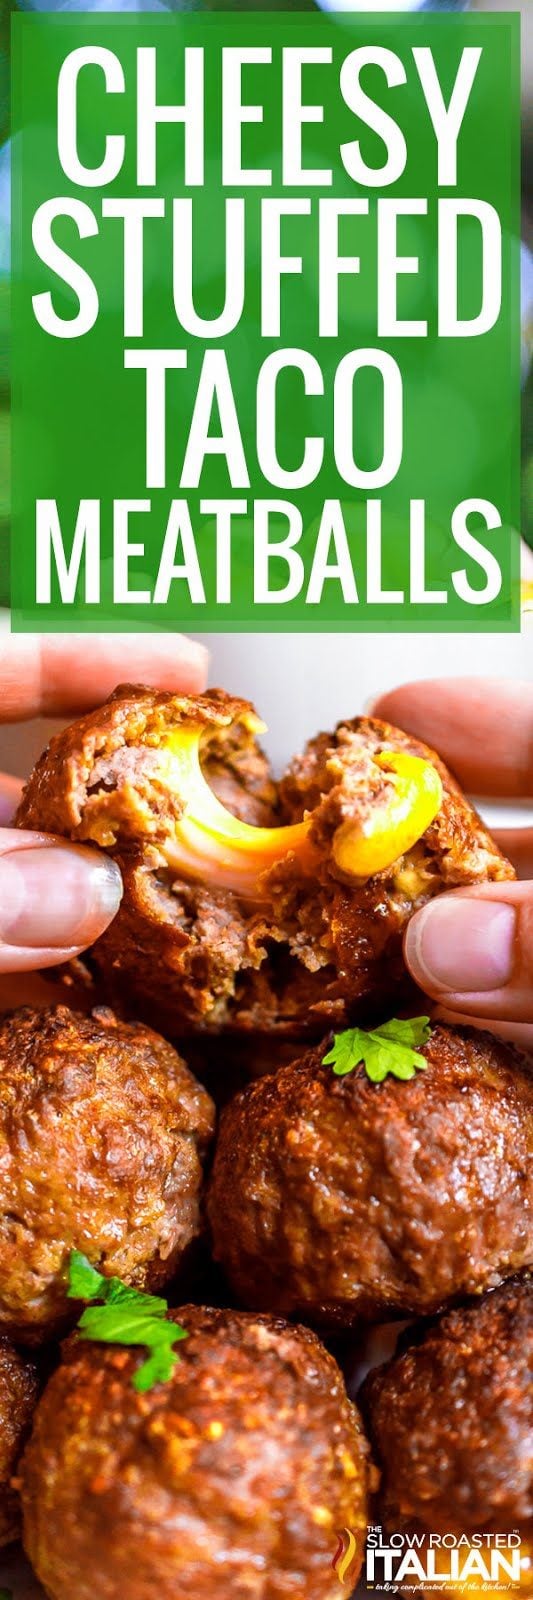 titled image (and shown): Tex Mex meatballs recipe post